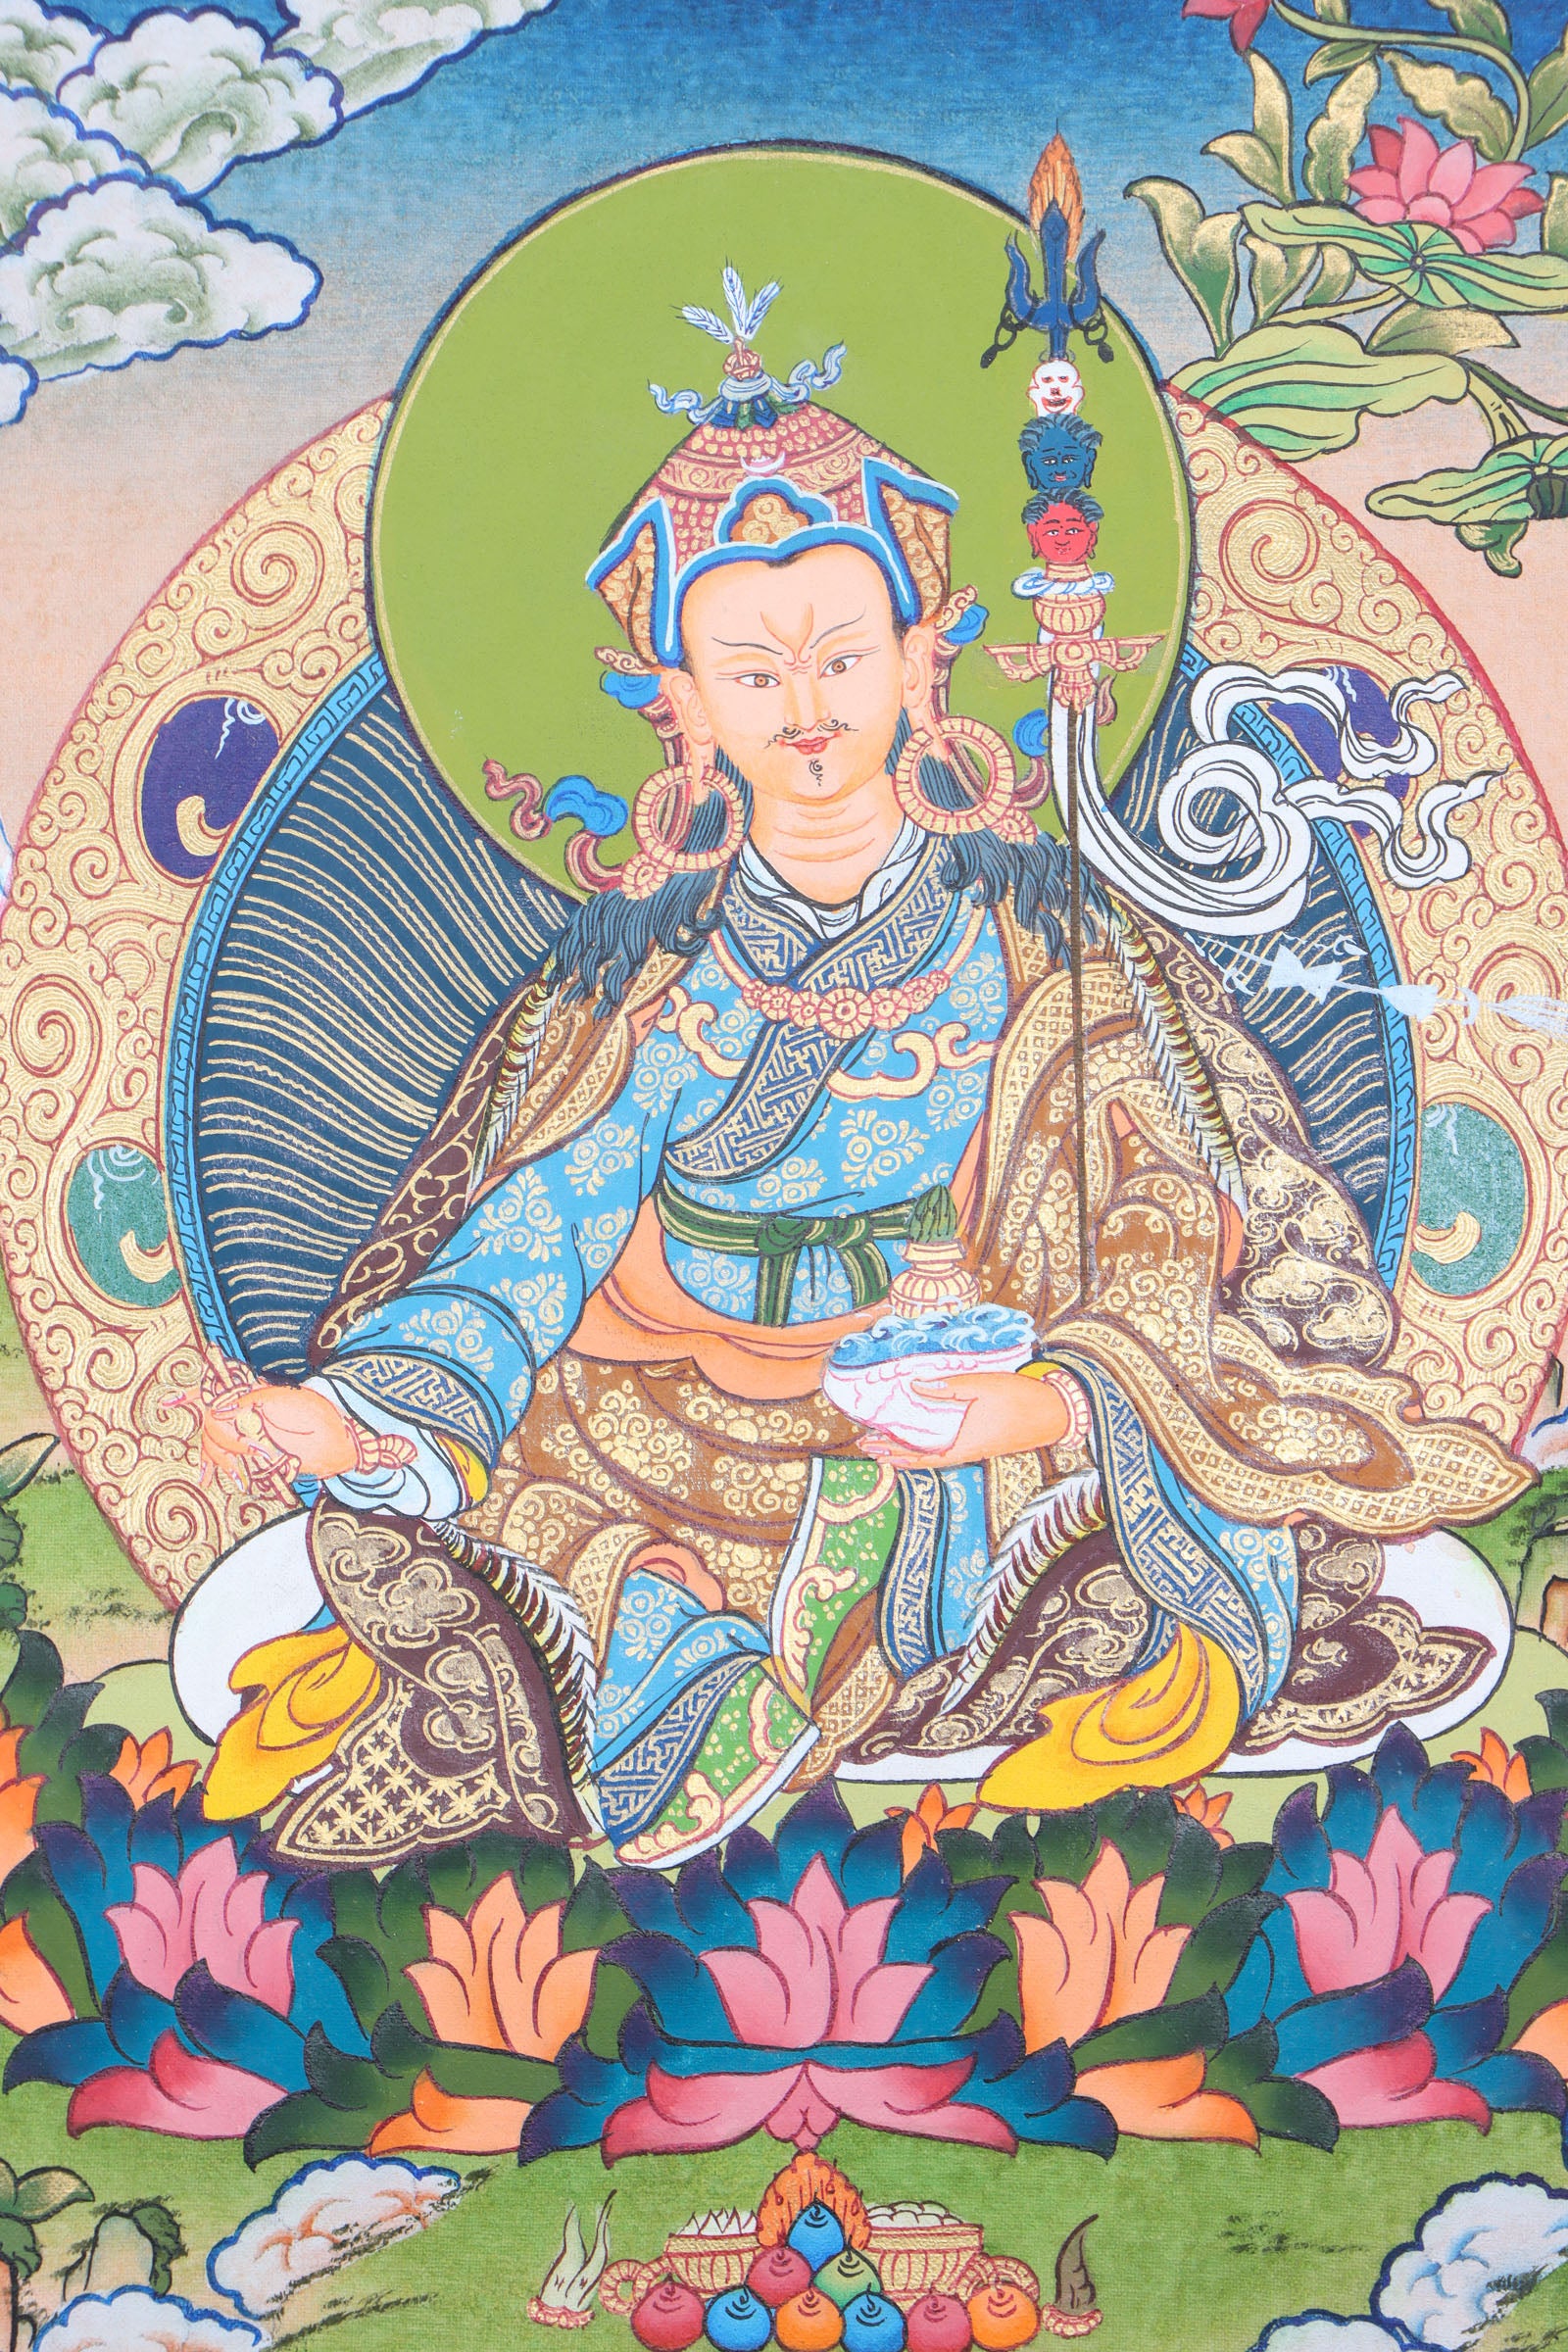 Guru thangka painting is a masterpiece that reflects the beauty and wisdom of the Himalayan culture.